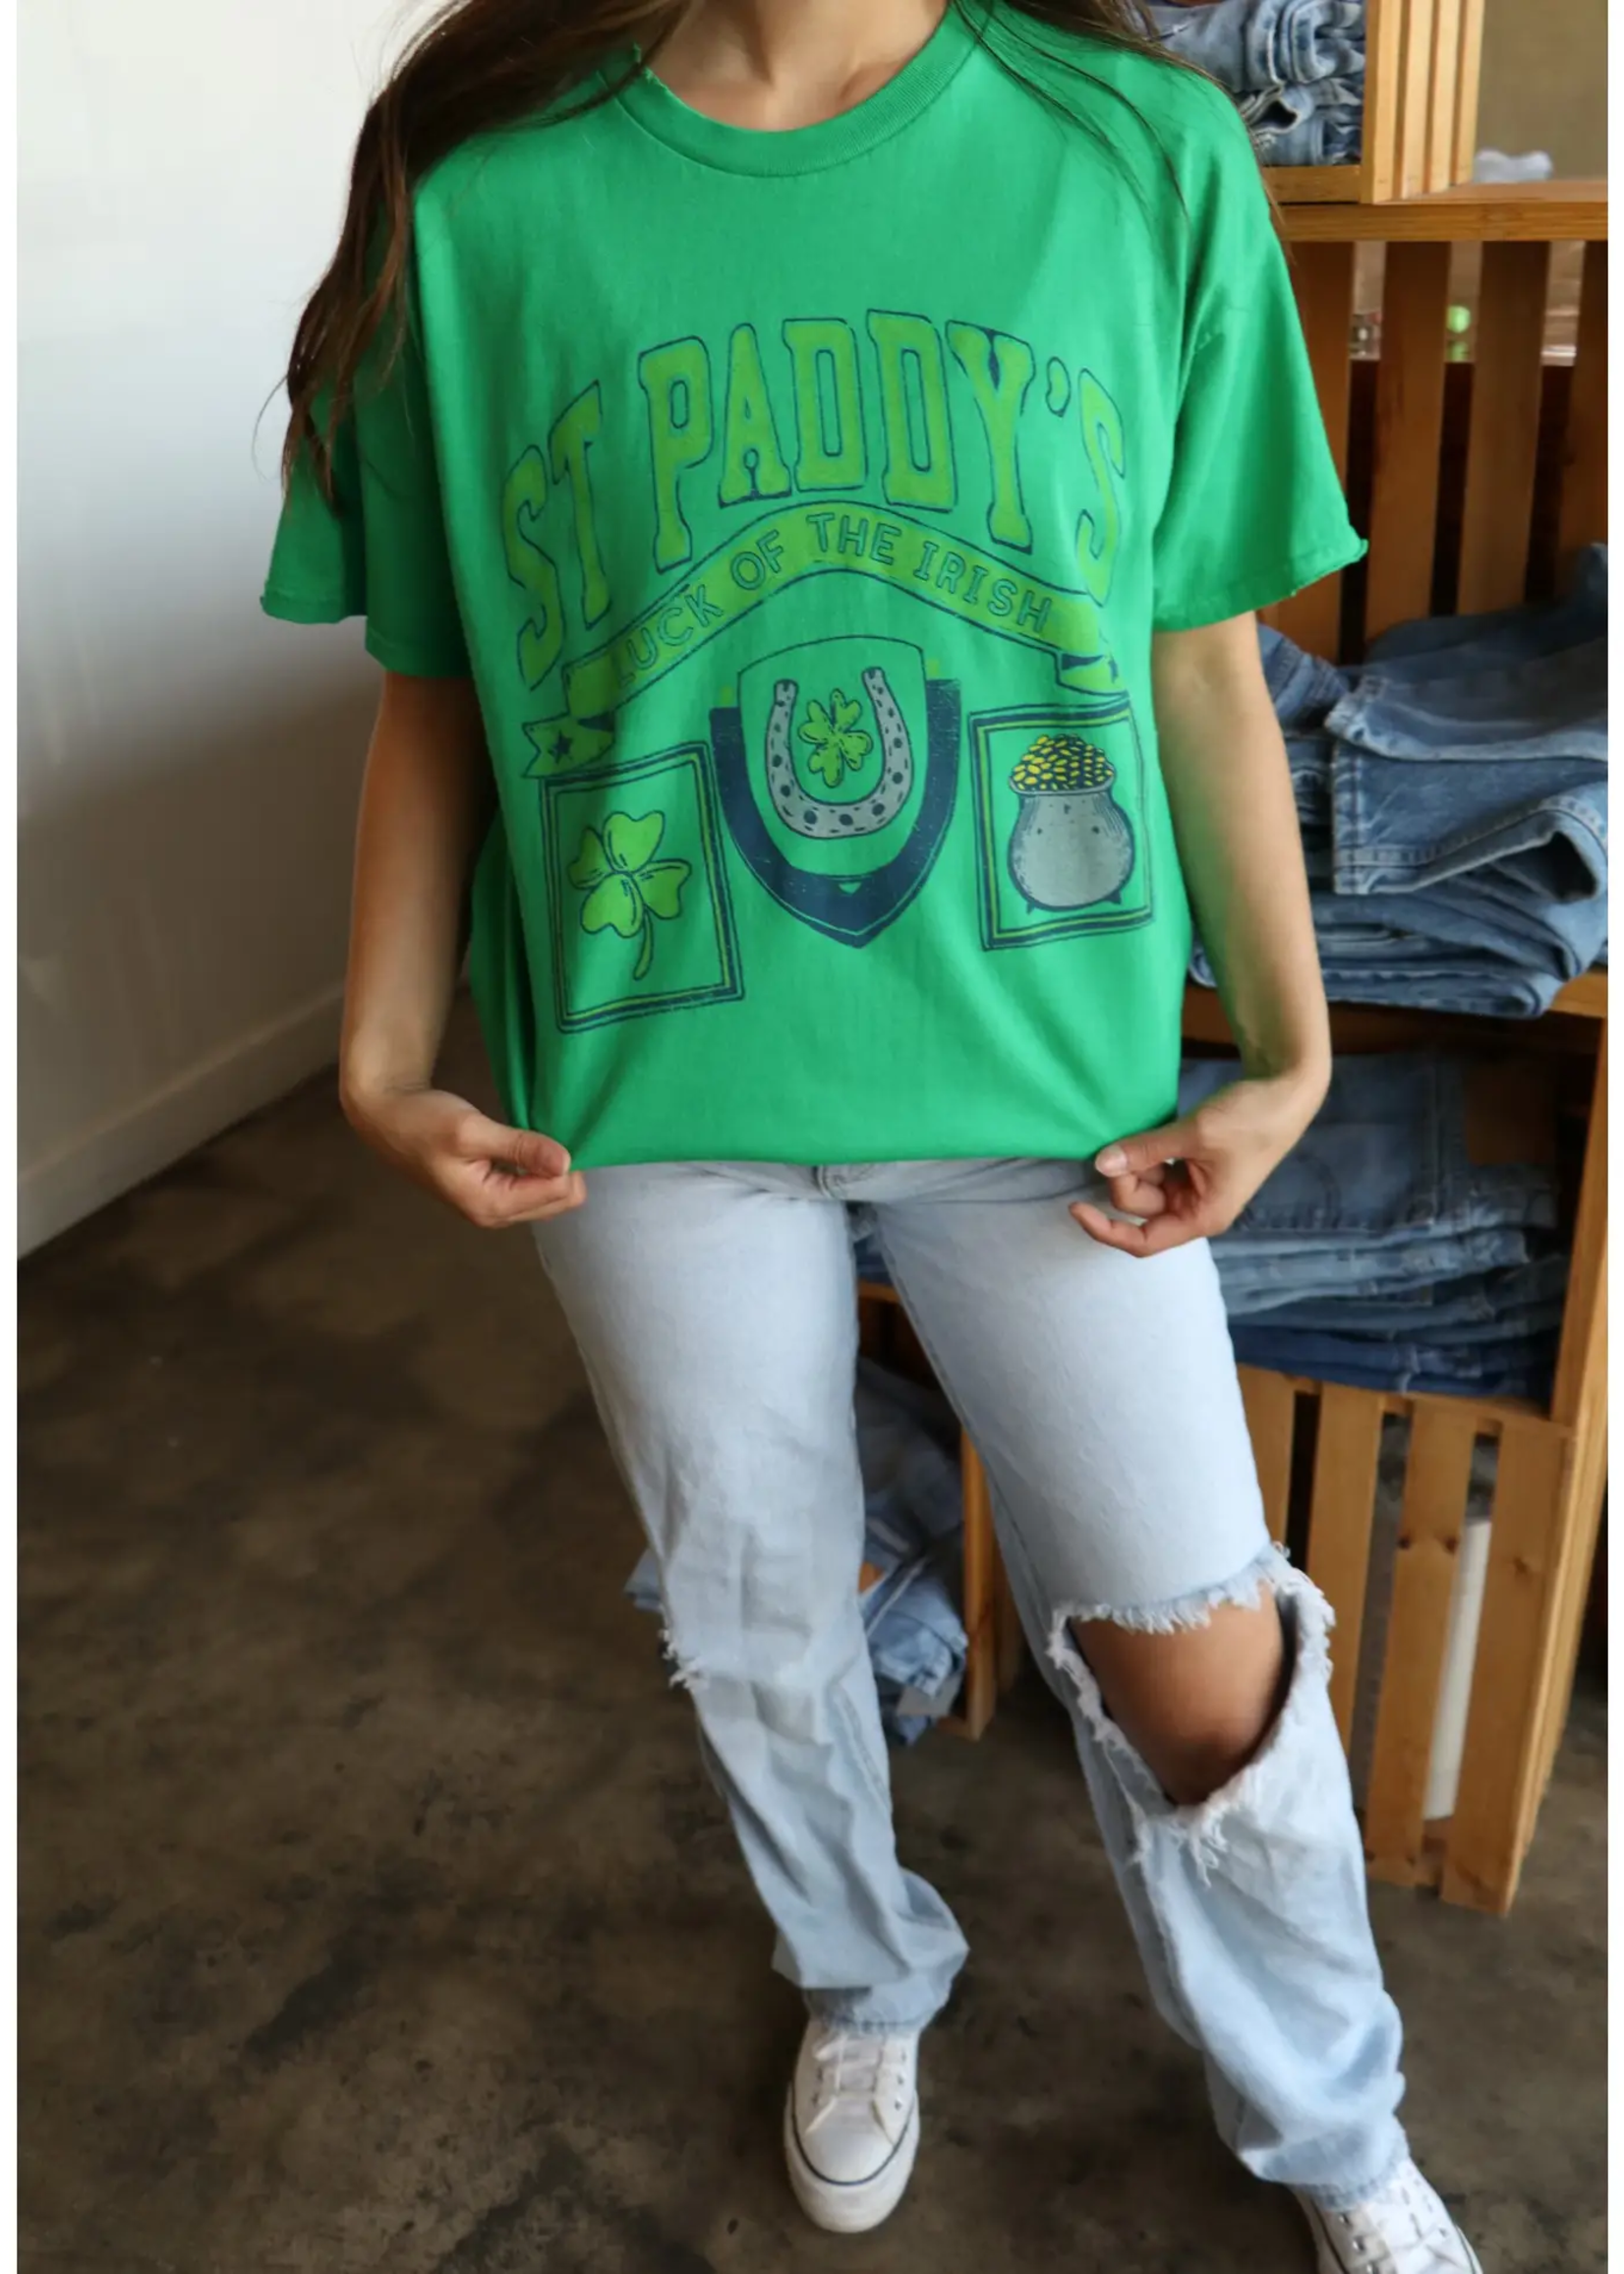 St Paddy's Day Graphic Tee